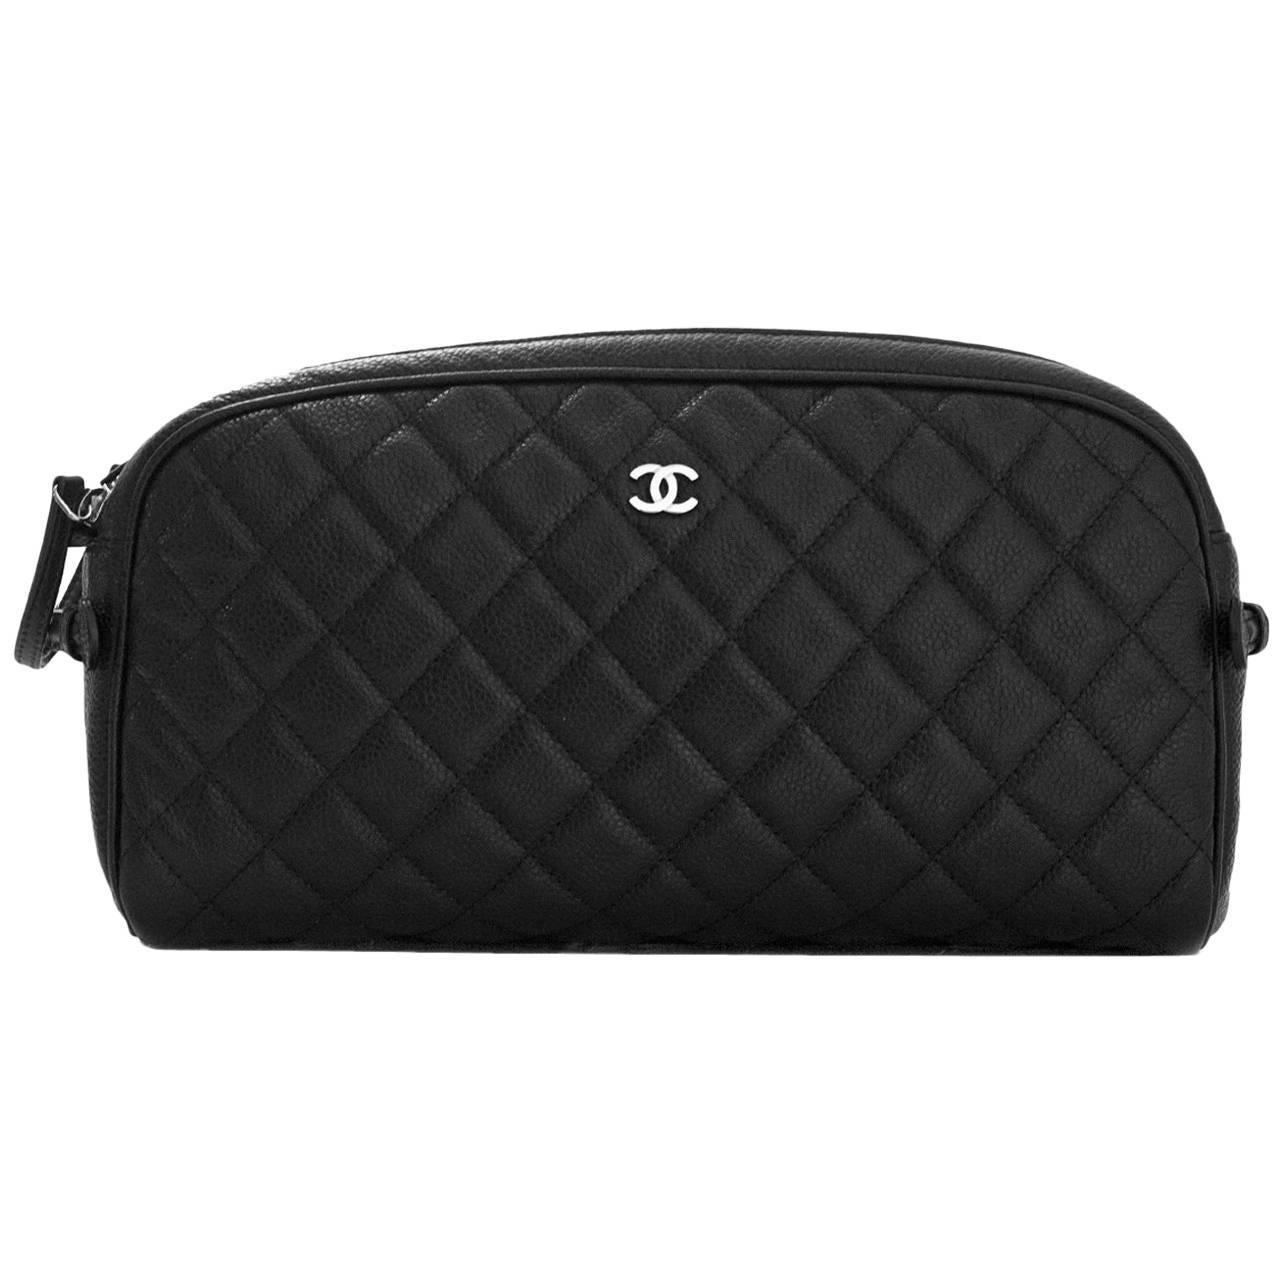 Chanel Black Caviar Leather Double Zip Cosmetic / Toiletry Case Bag